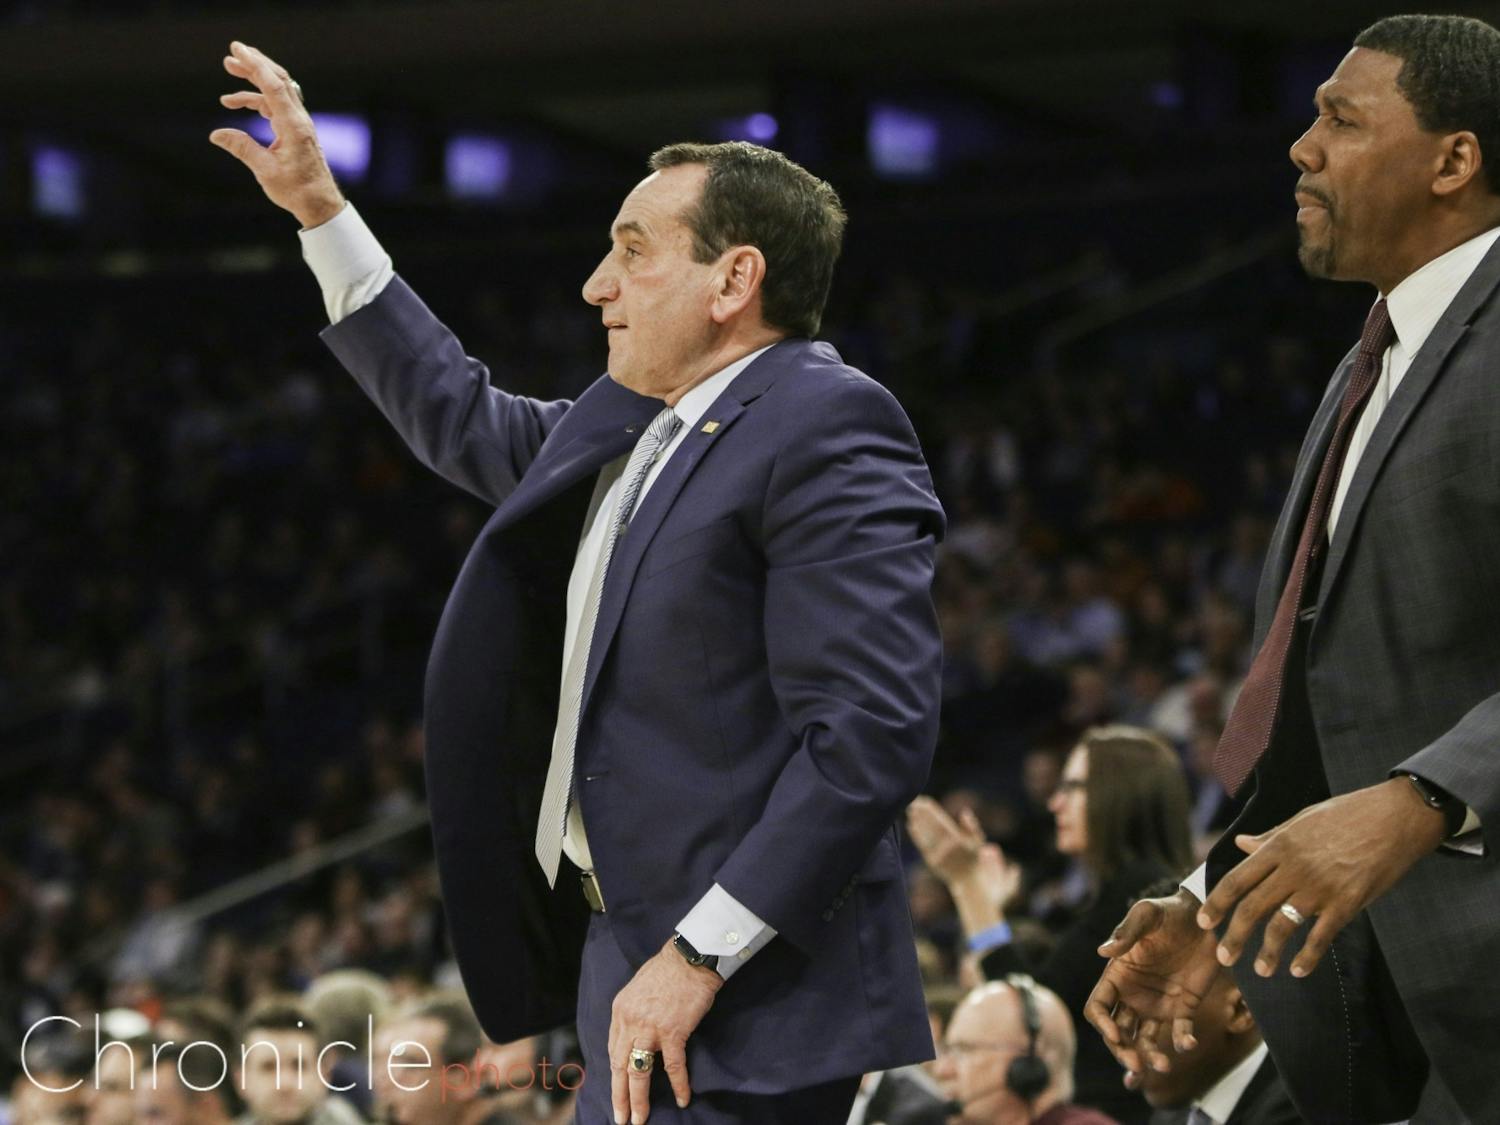 Duke's schedule continues to go through the challenges of this unique 2020-21 season.